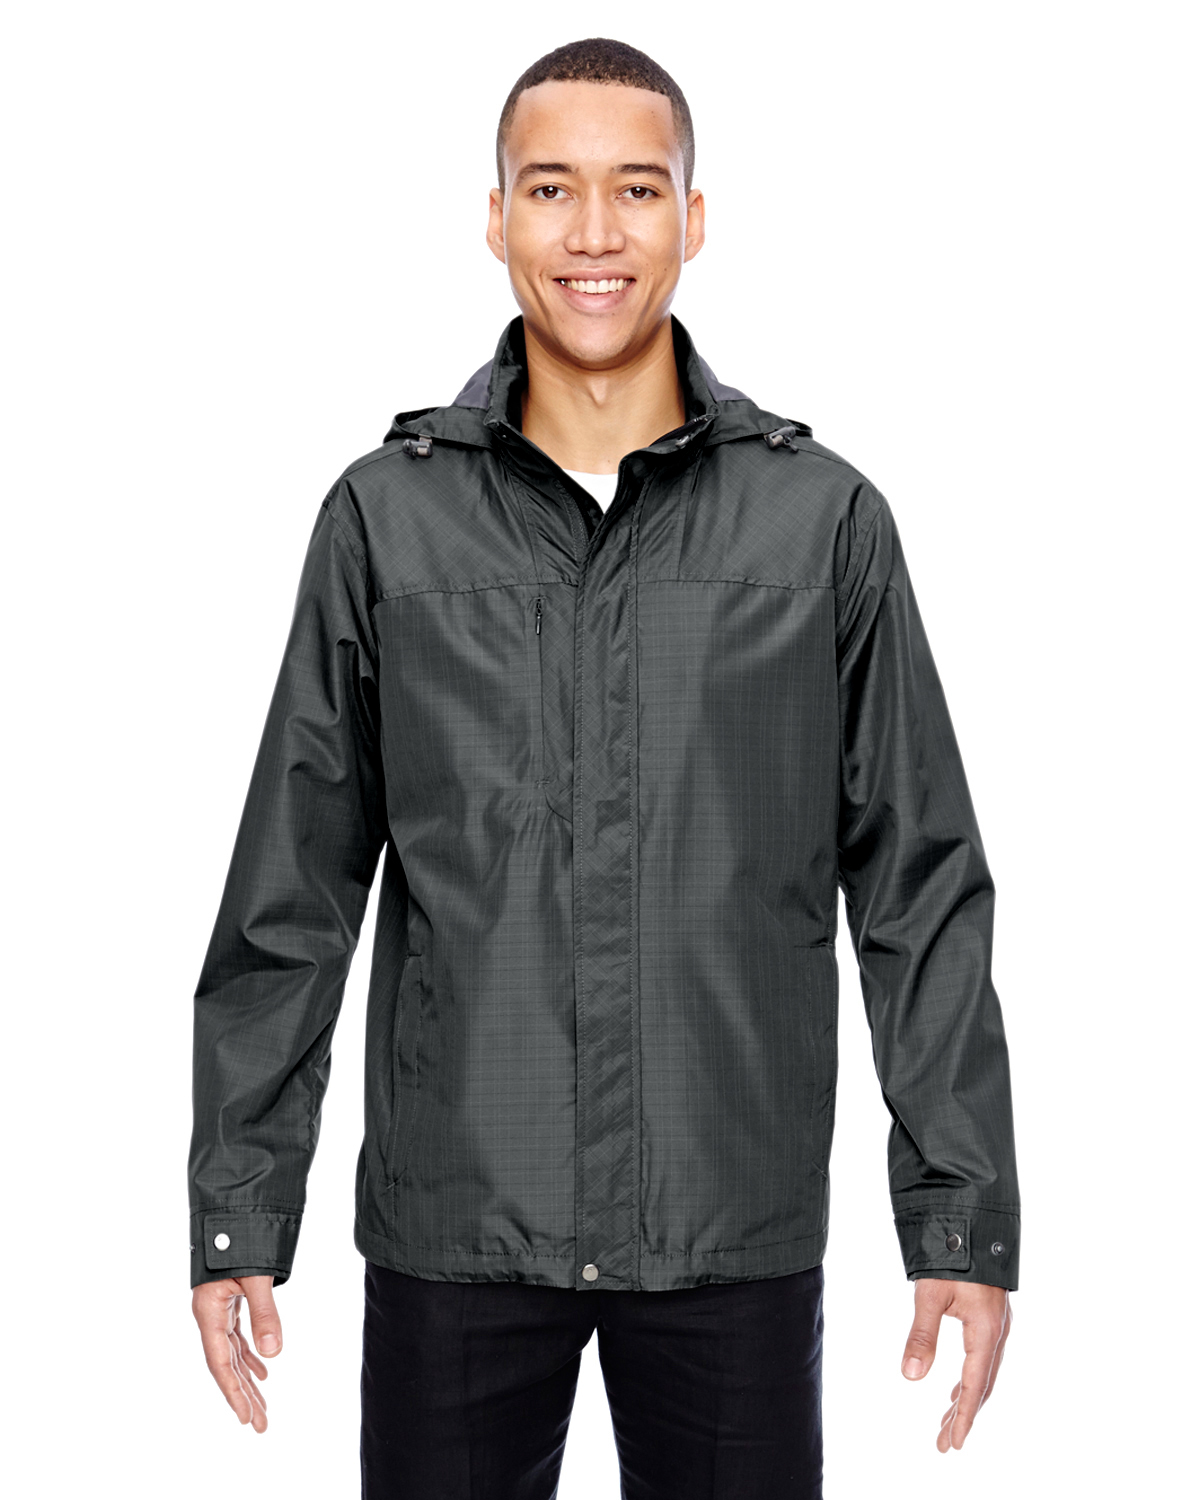 Ash City - North End 88216 - Men's Excursion Transcon Lightweight Jacket with Pattern